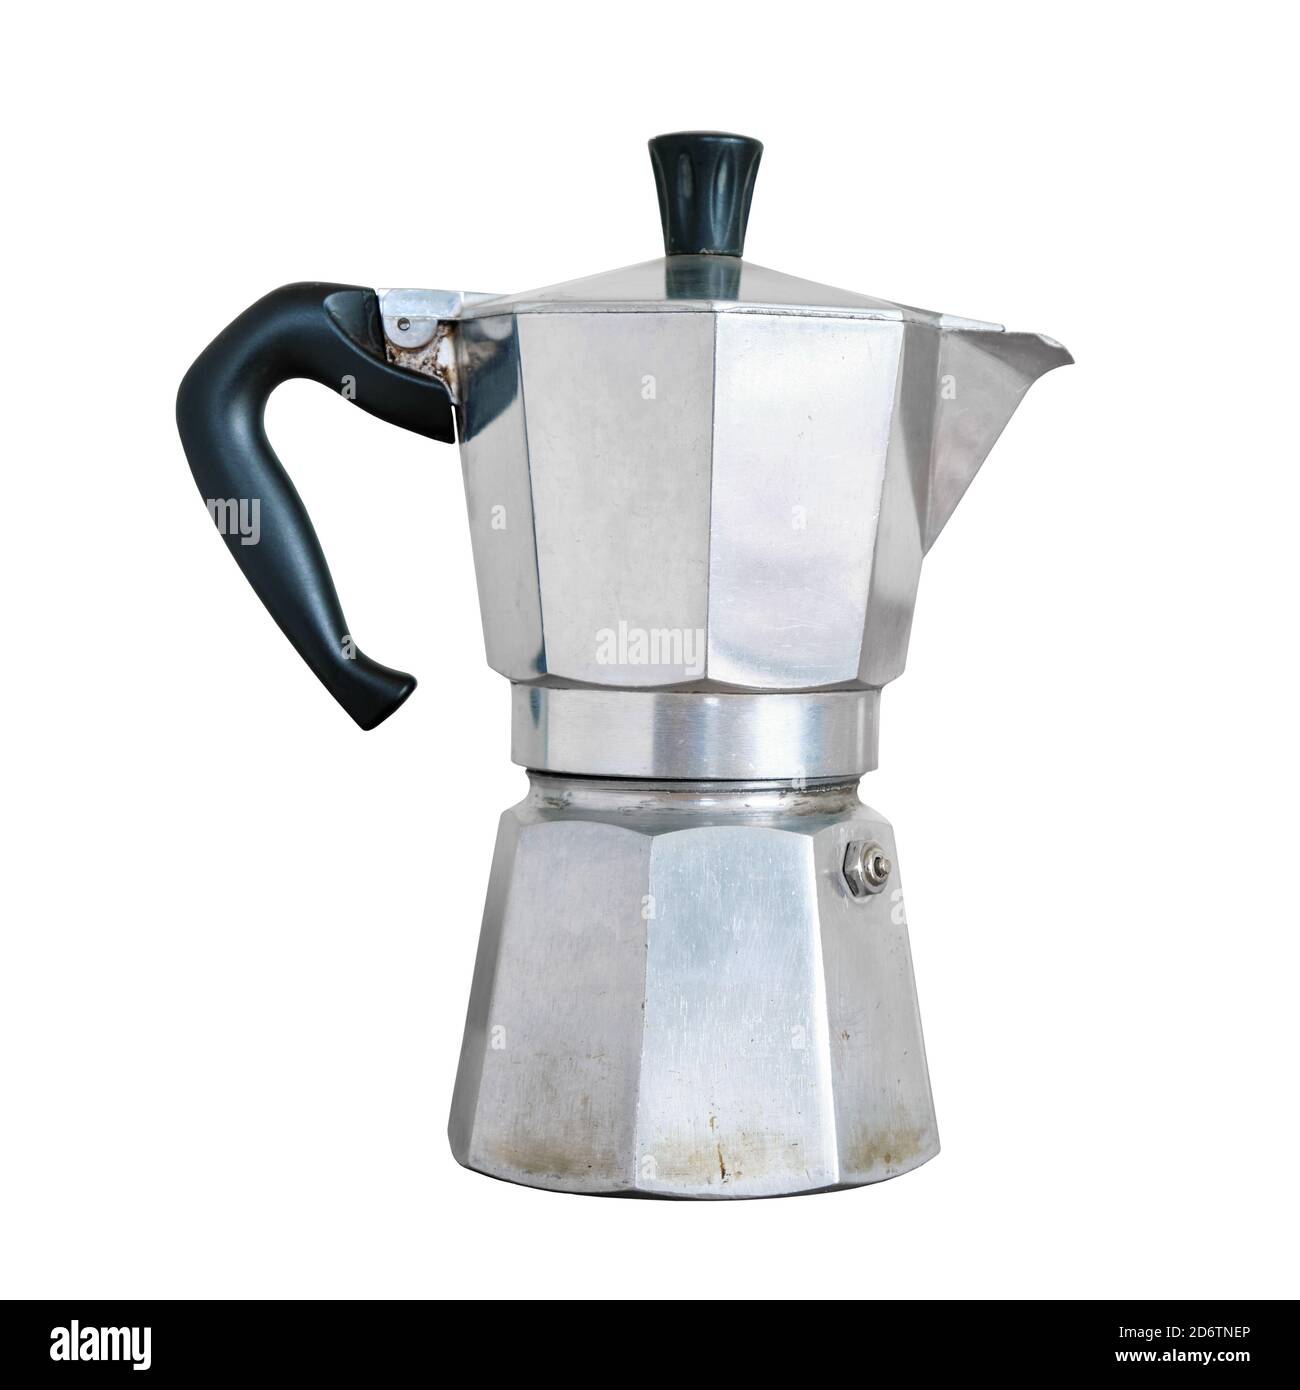 https://c8.alamy.com/comp/2D6TNEP/traditional-used-italian-coffee-maker-isolated-on-white-background-2D6TNEP.jpg